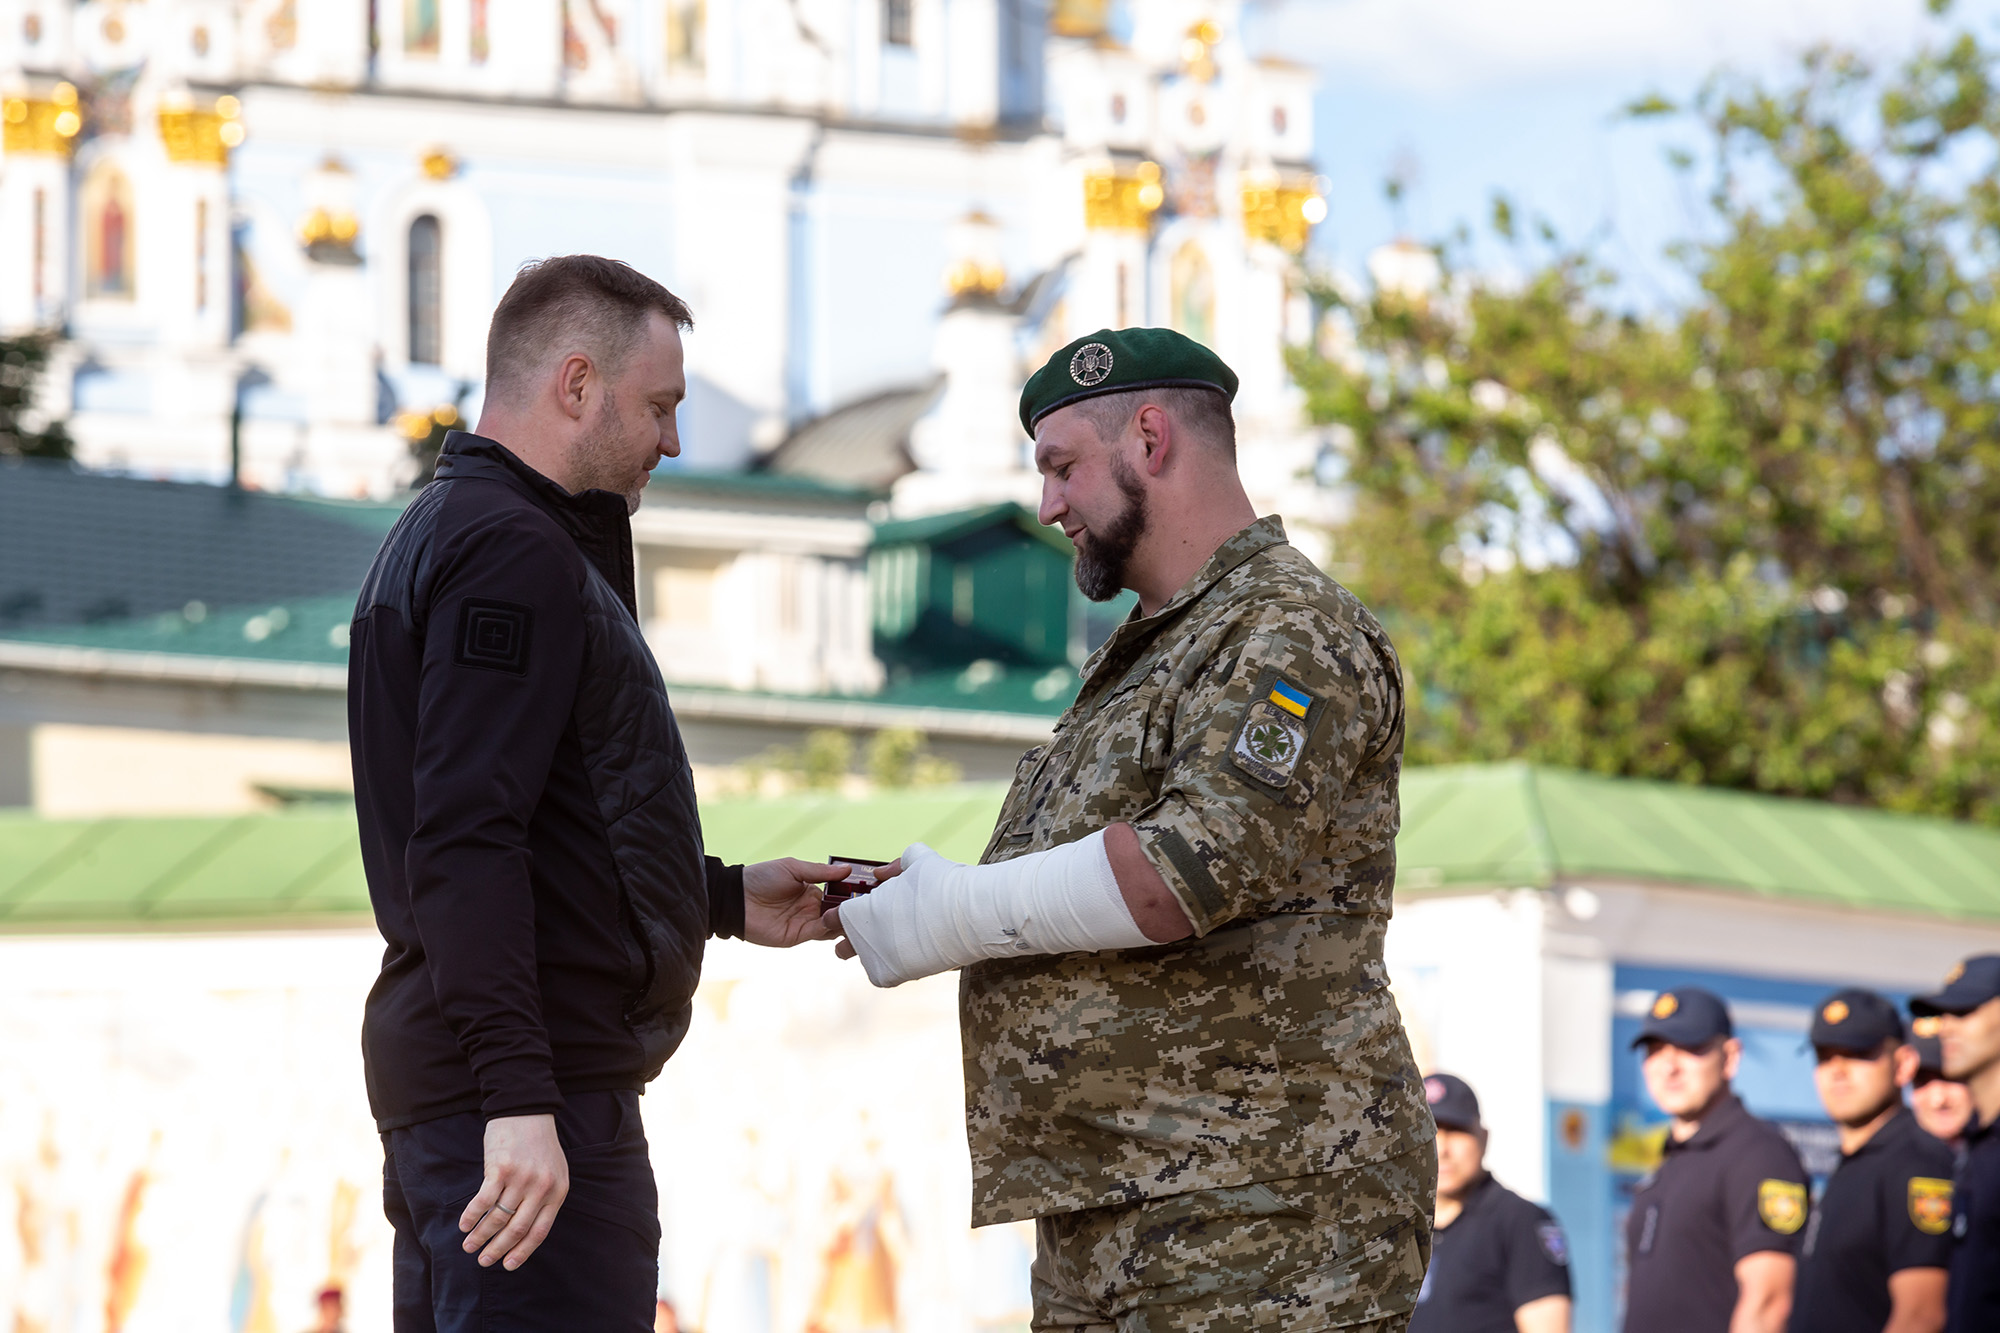 Minister of Internal Affairs, Denis Monastyrsky decorates a serviceman with the Medal of Defender of the Fatherland at Michailovskyi Square in front of Saint Michail Monastery in Kyiv, Ukraine, on June 14.